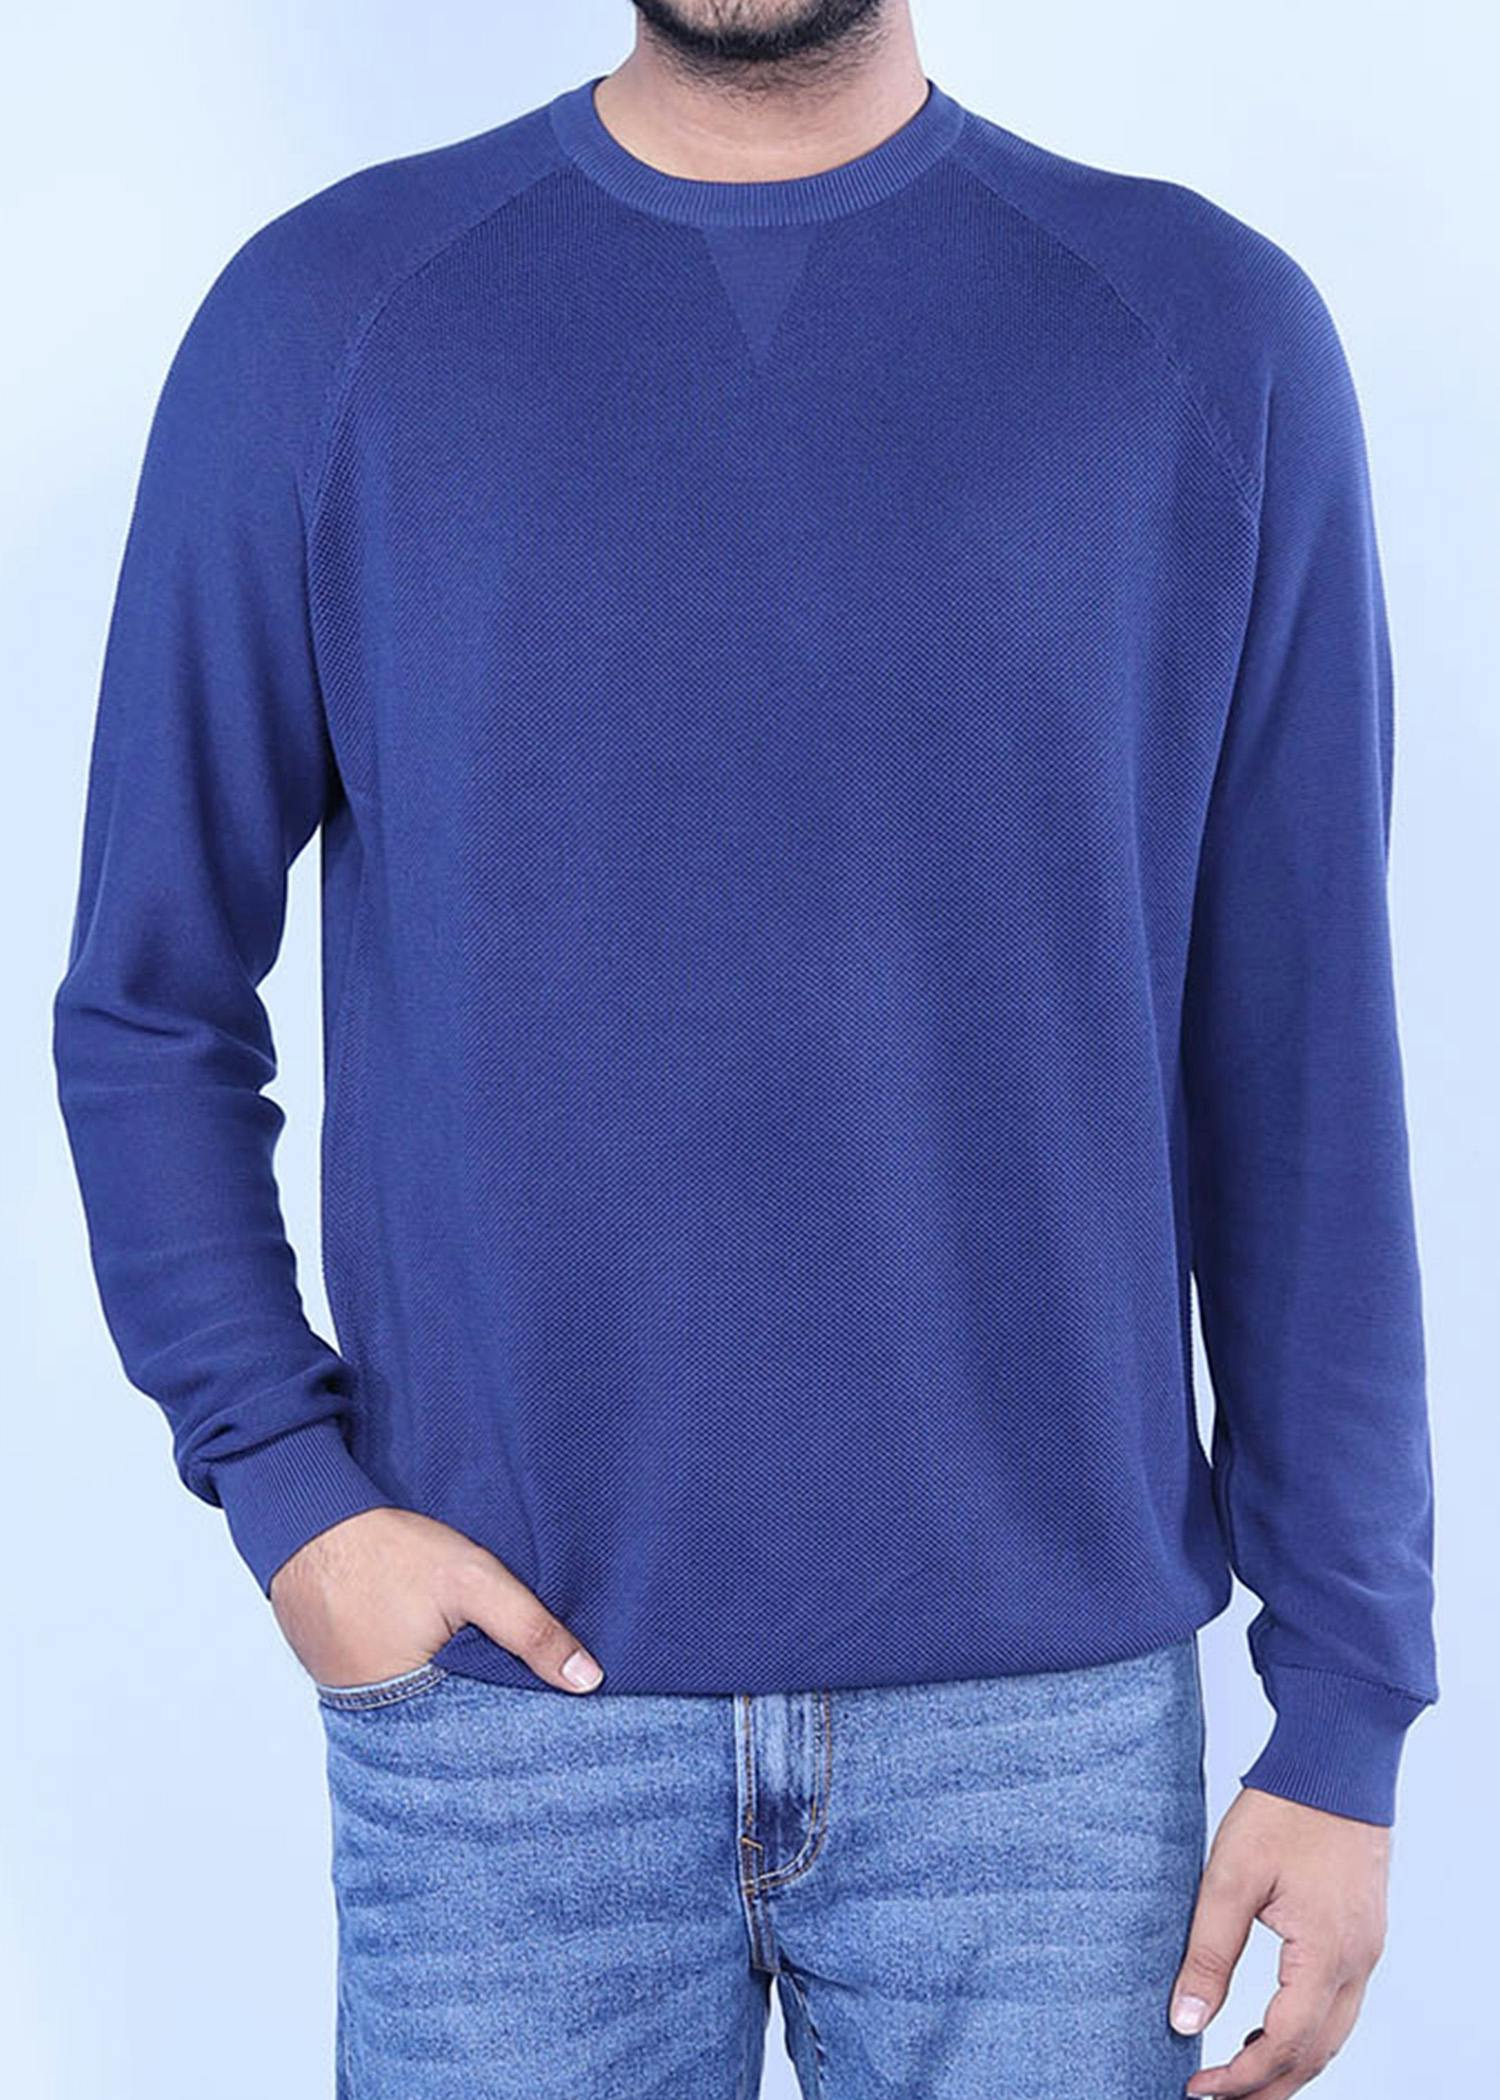 spotted owl sweater  blue color full headcropped